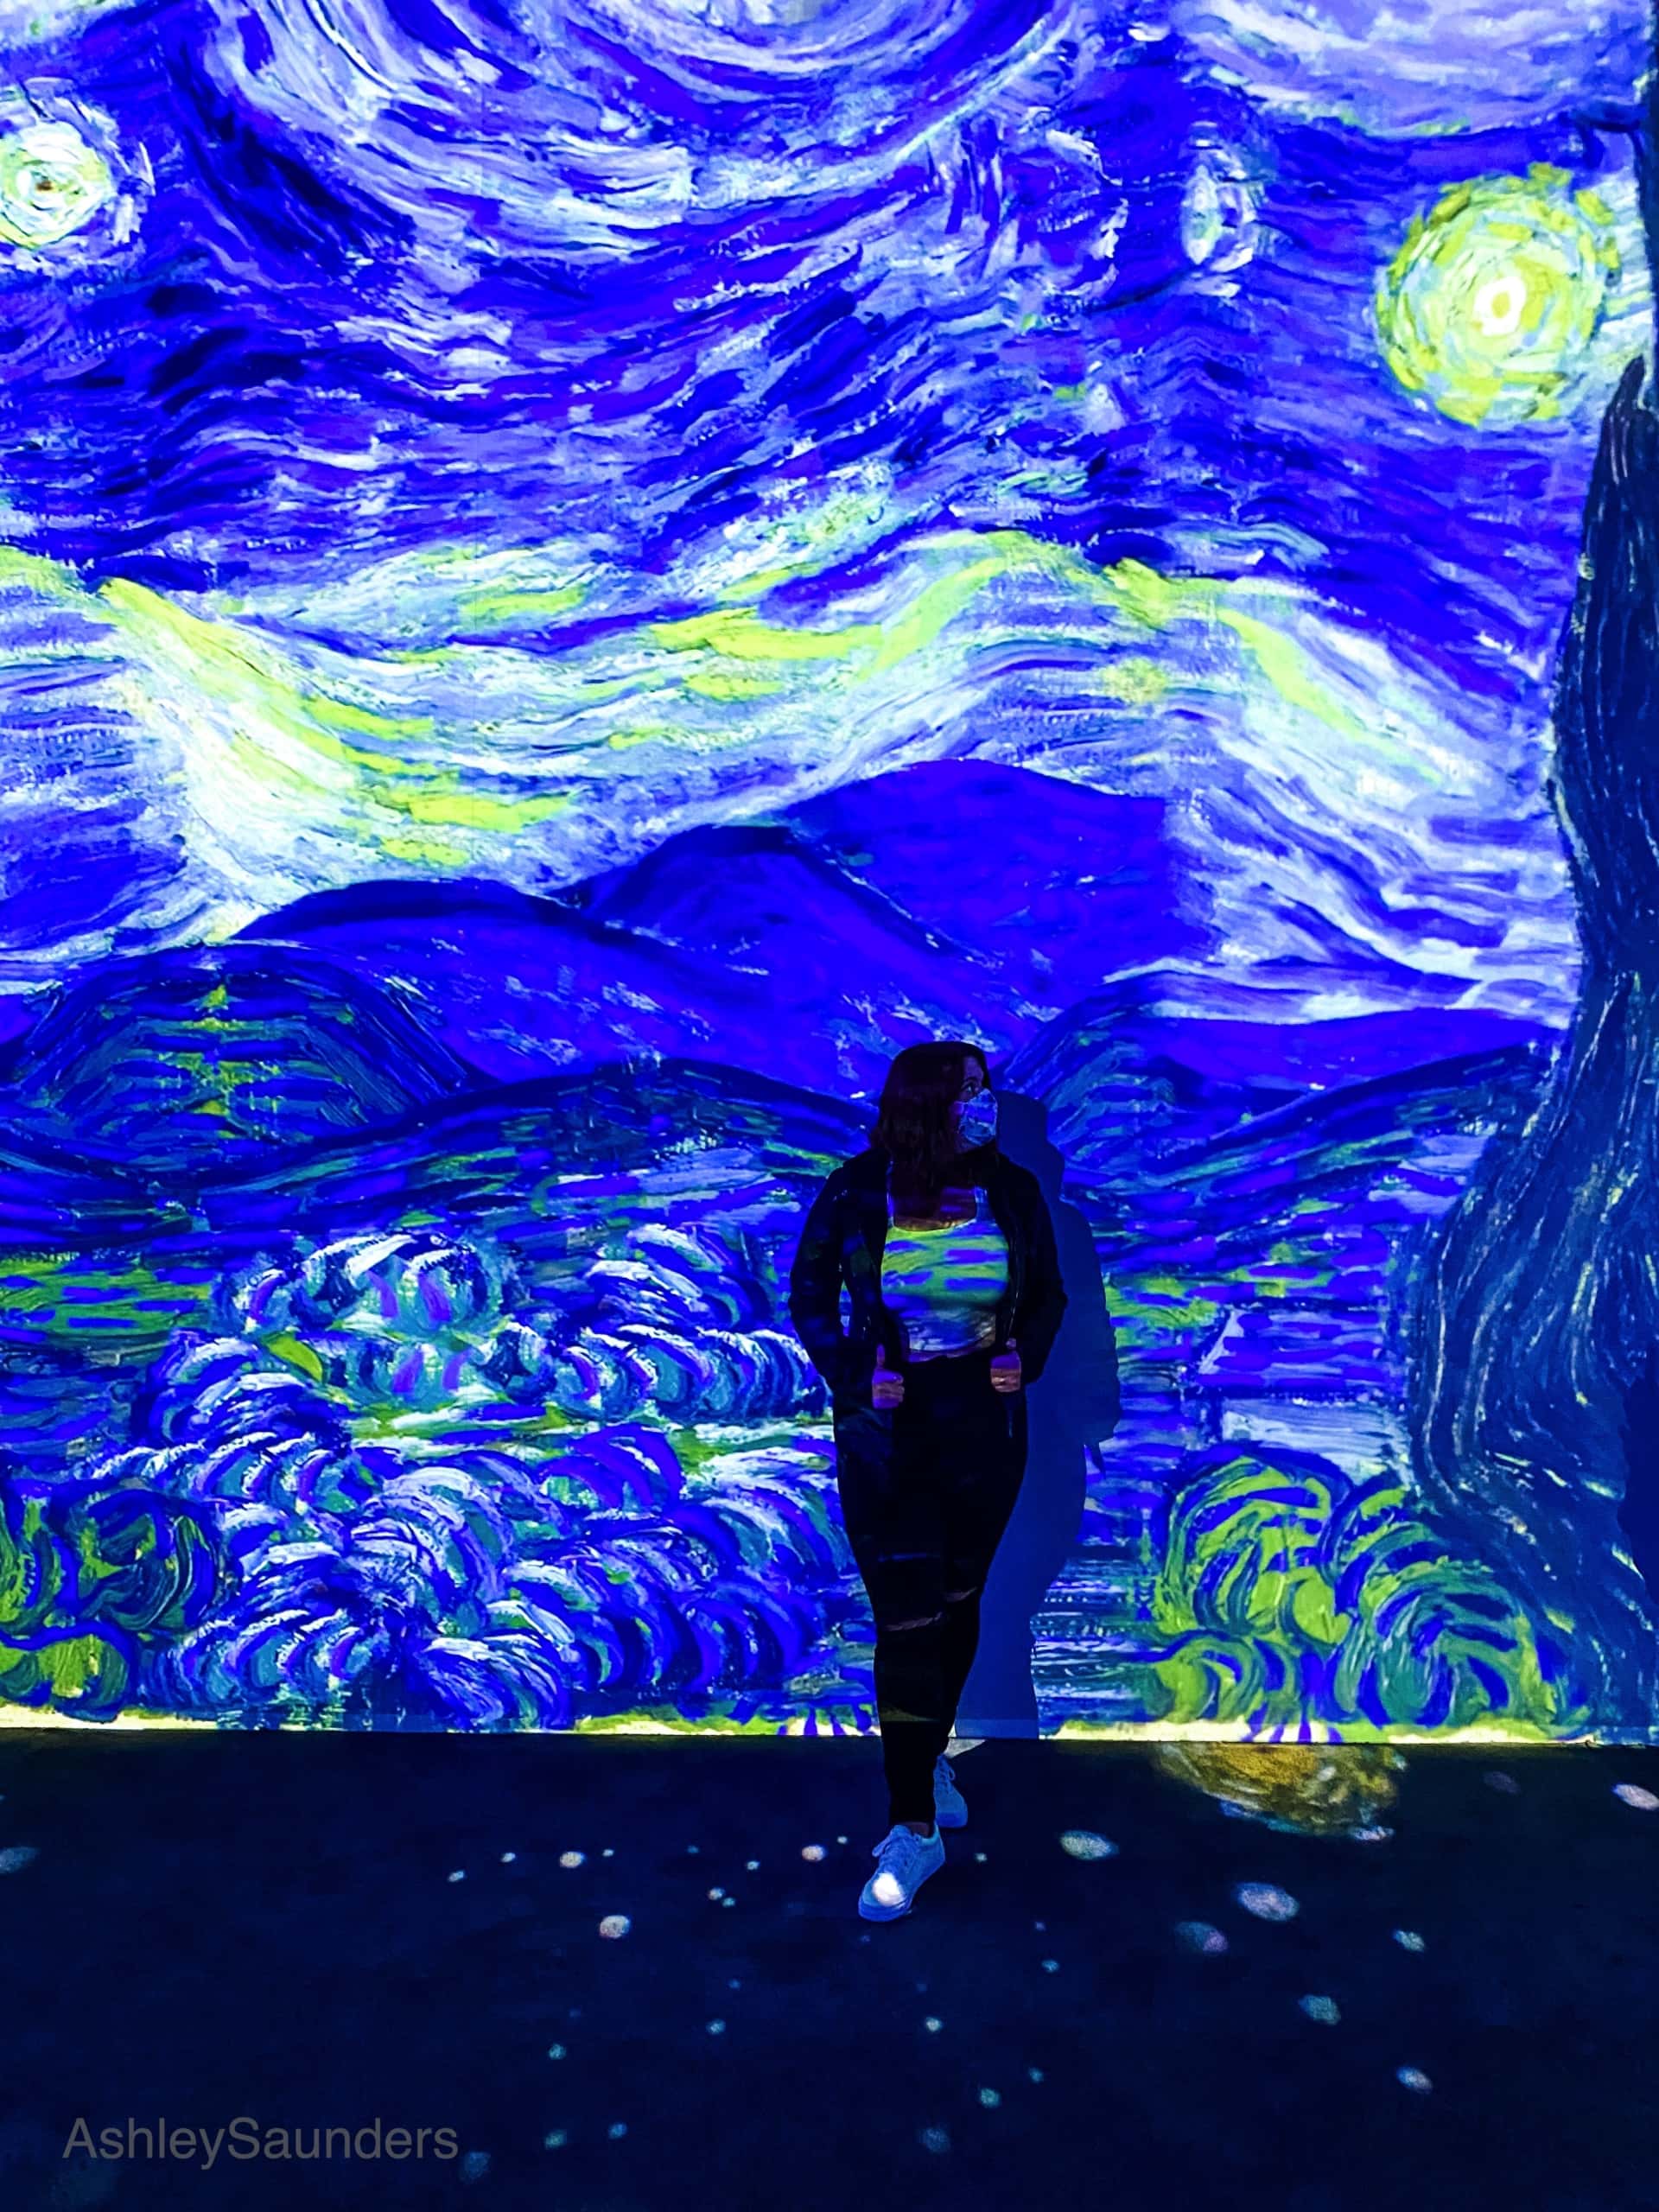 Van Gogh The Immersive Experience Review starry night